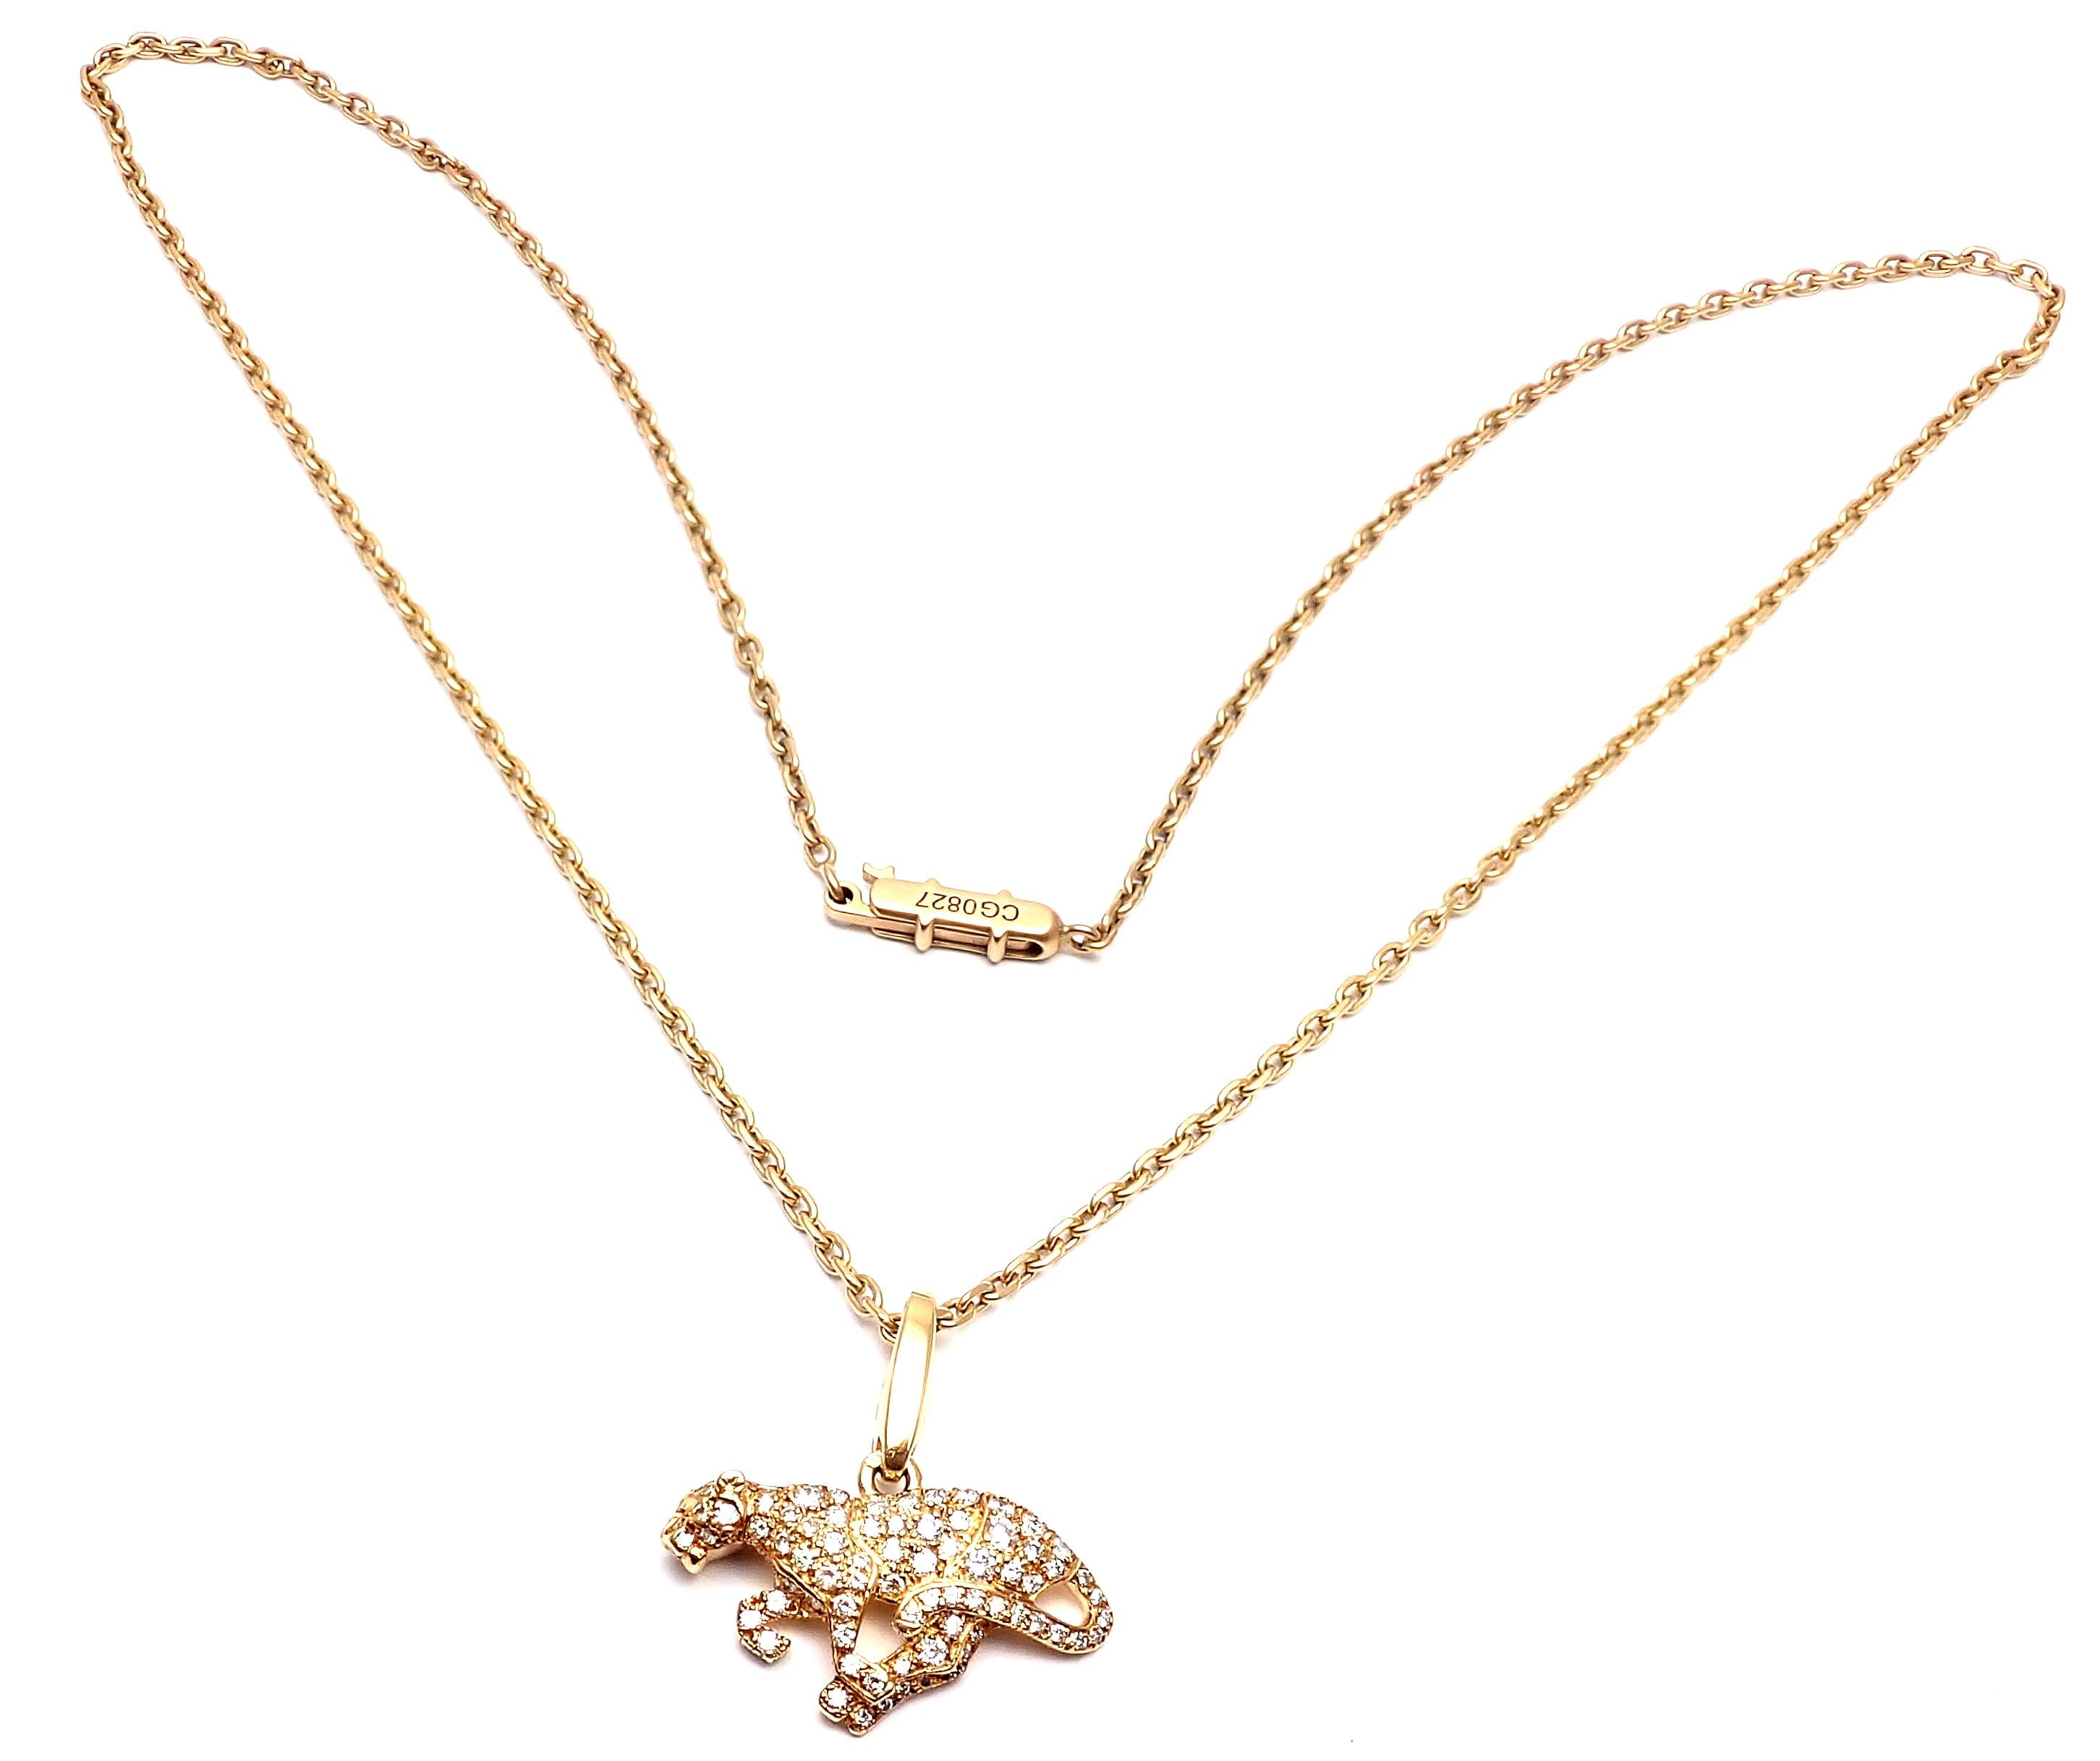 18k Yellow Gold Panther Diamond Pendant Necklace by Cartier. Part of the Panthere Collection. 
With Round brilliant cut diamonds
 VVS1 clarity, E color total weight approx. .50ct
Details: 
Weight: 10.3 grams
Length: 17